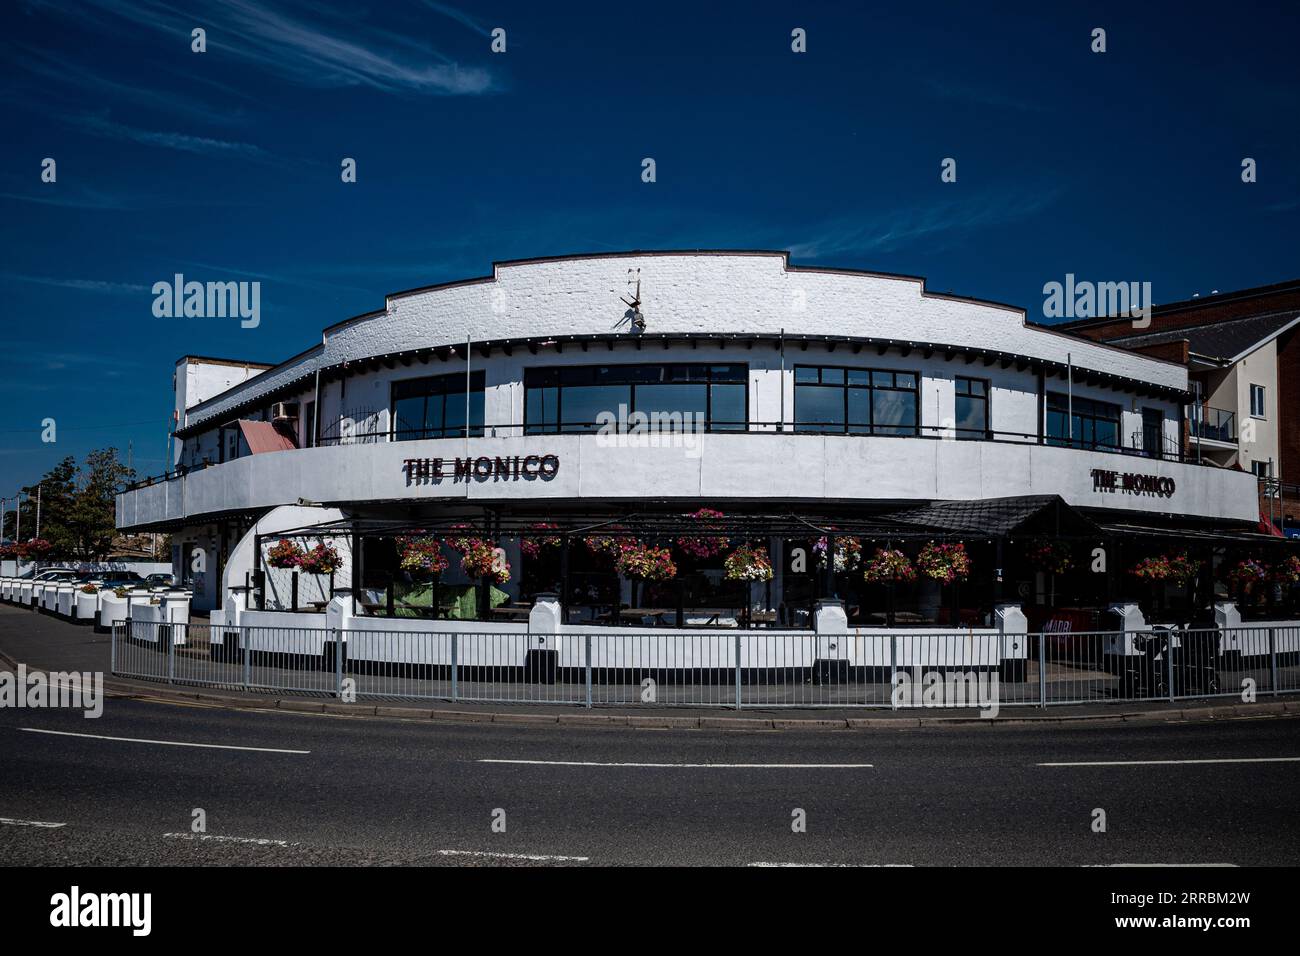 The Monico Canvey Island. The Monico Dining Rooms. Pub restaurant bulit in 1938 as the Hotel Monico located at 1-3 Eastern Esplanade Canvey Island UK Stock Photo